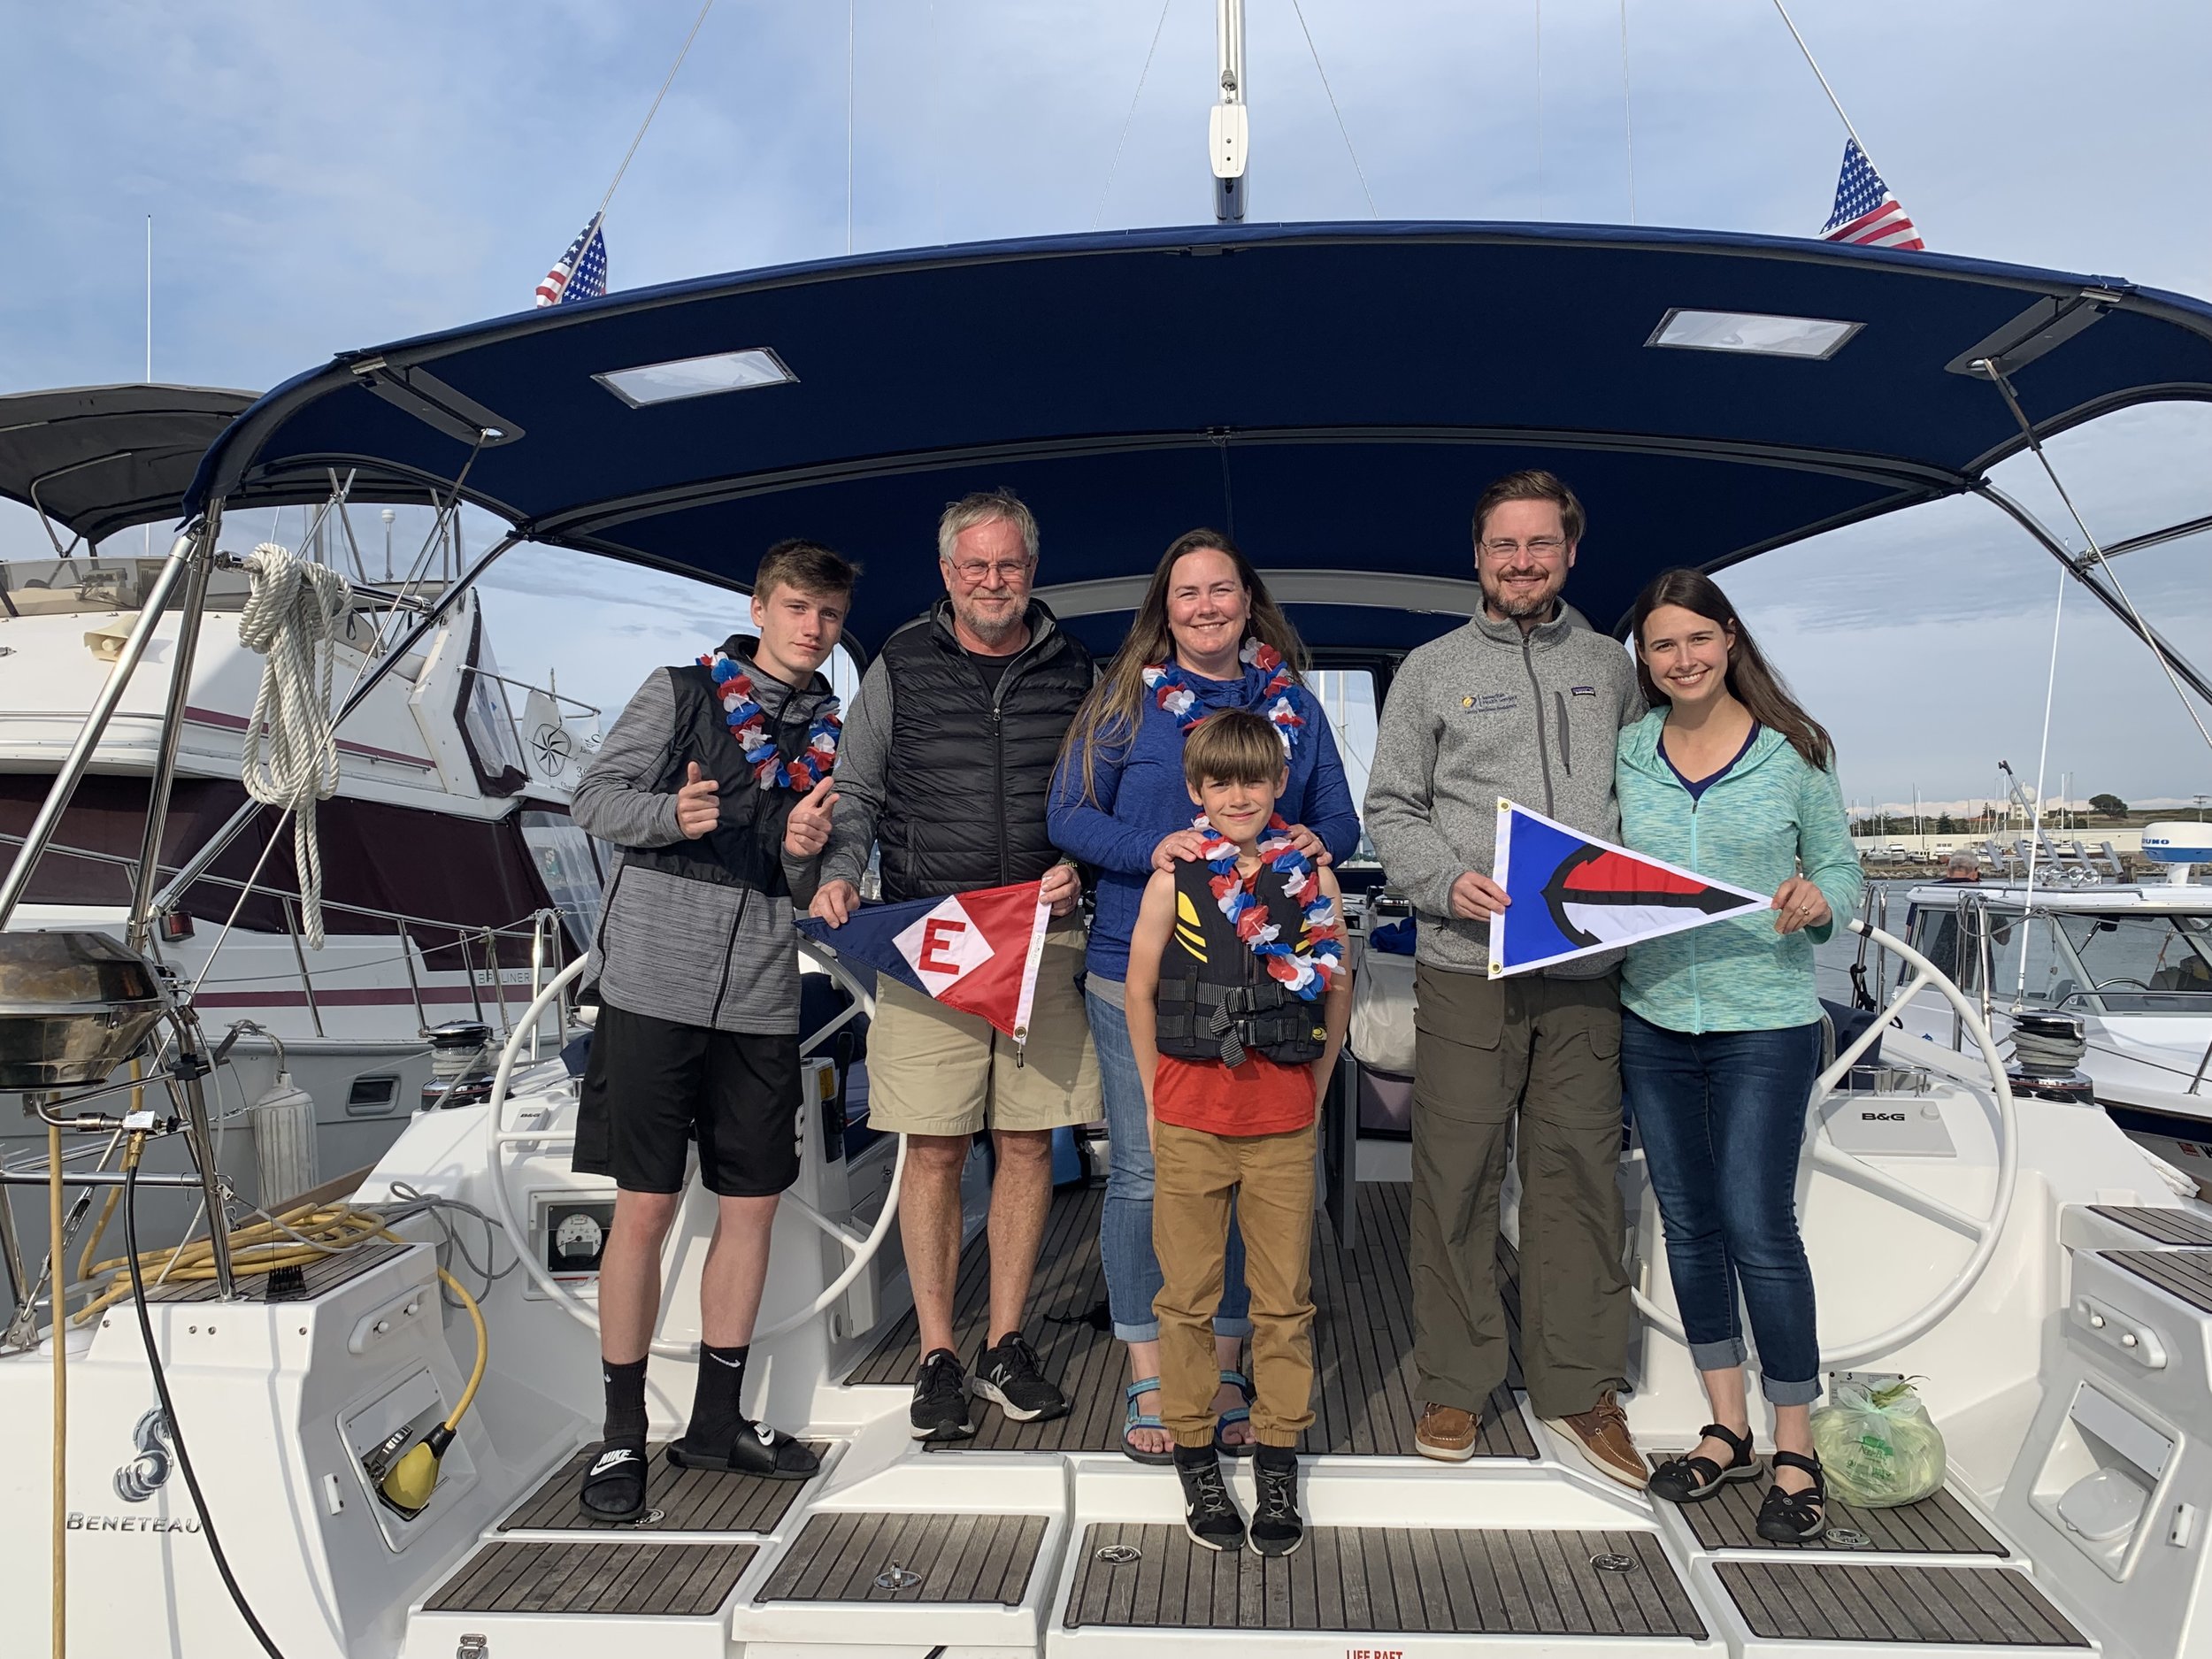  Richard  and his family show their EYC pride in Oak Harbor on Whidbey Island 